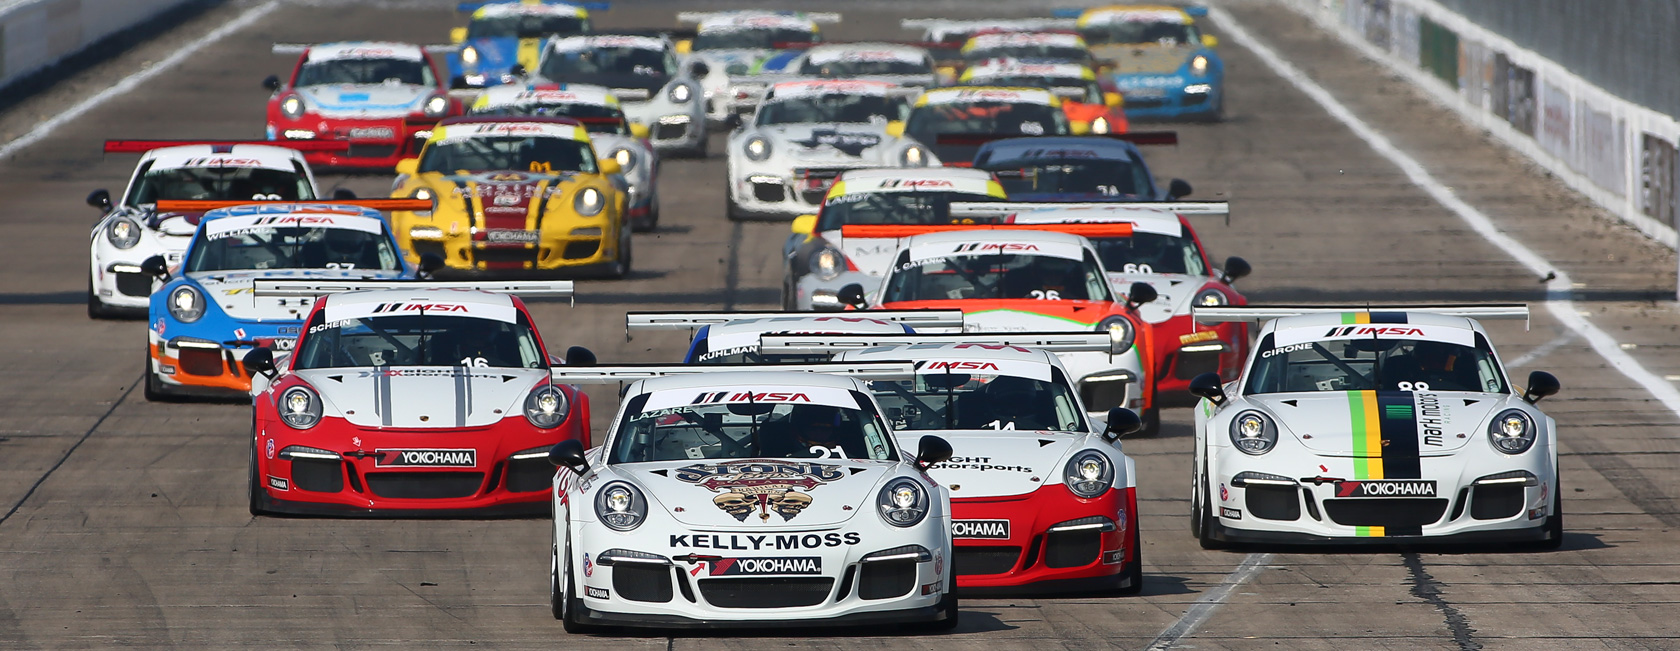 Porsche GT3 Cup Challenge: Circuit of the Americas